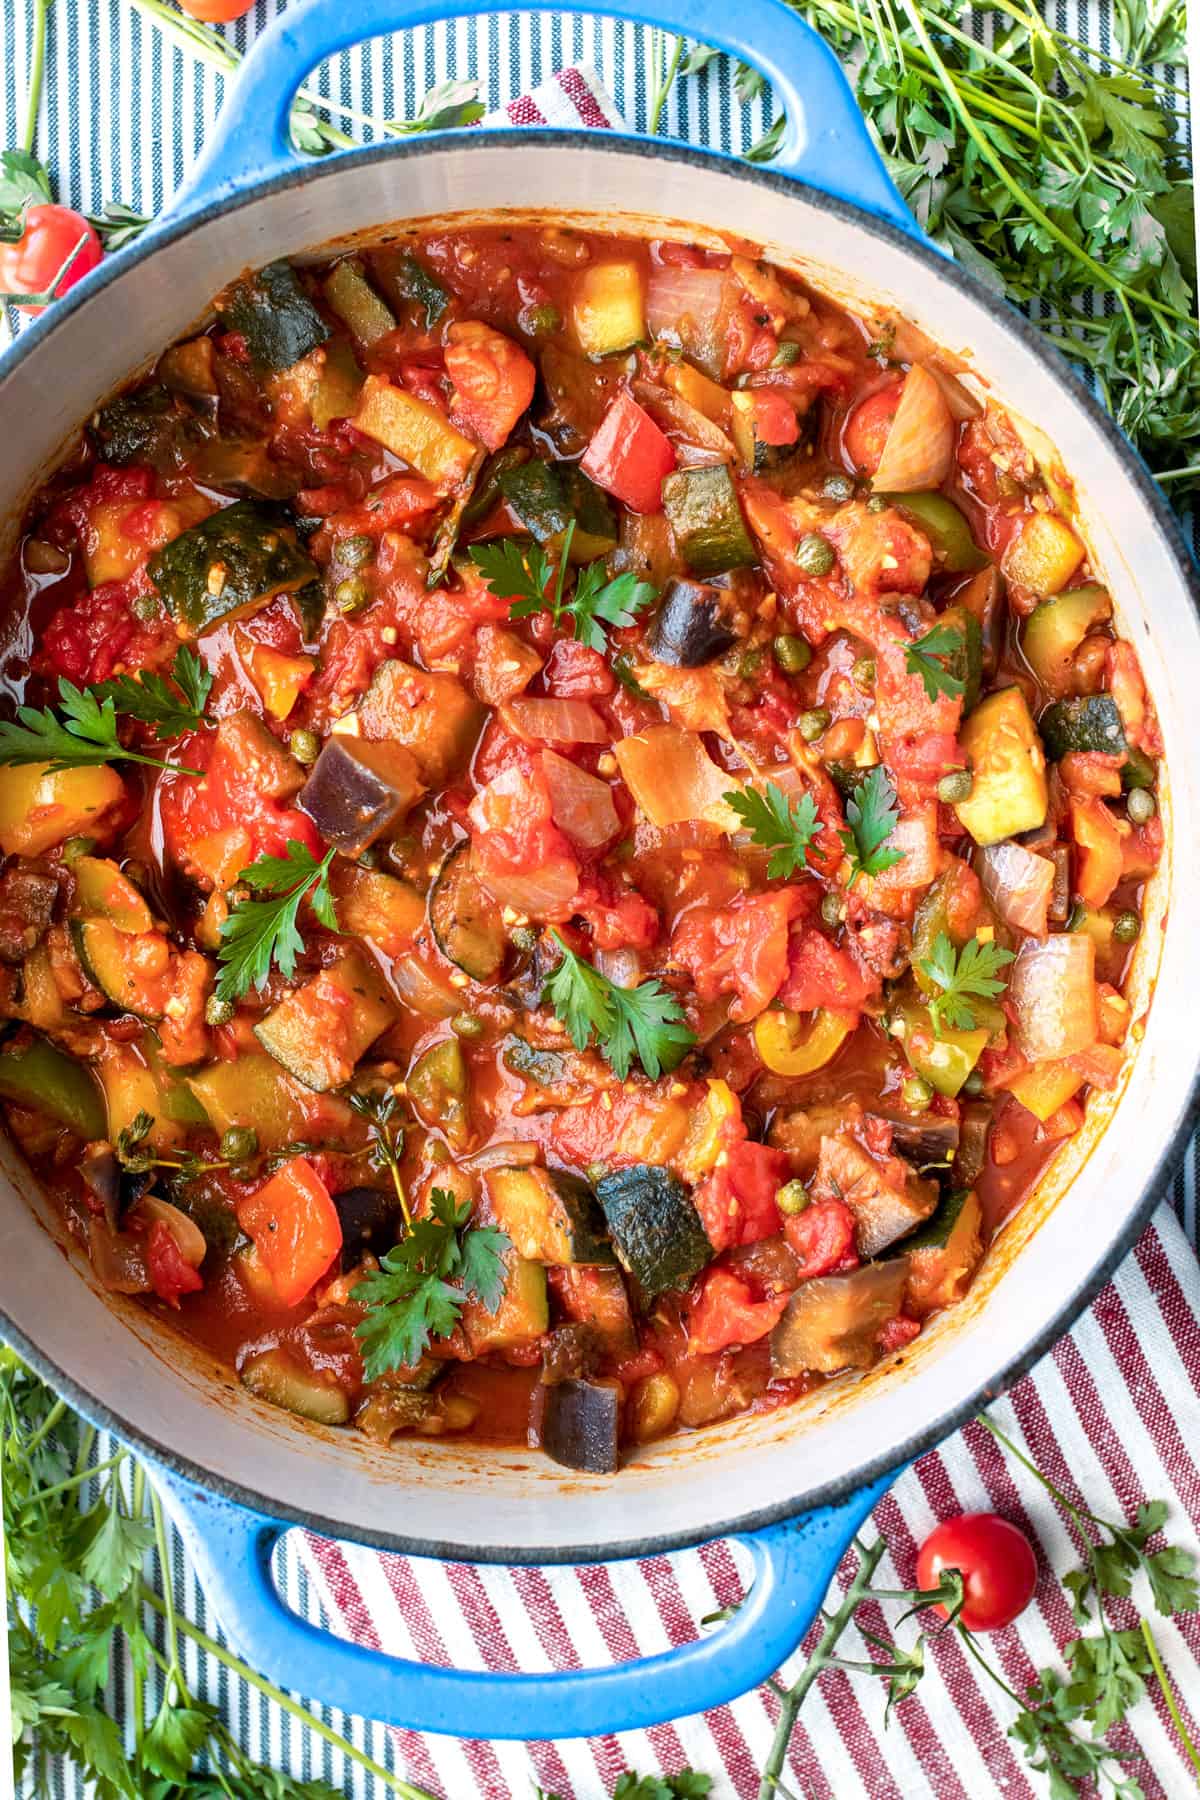 Dutch oven filled with ratatouille